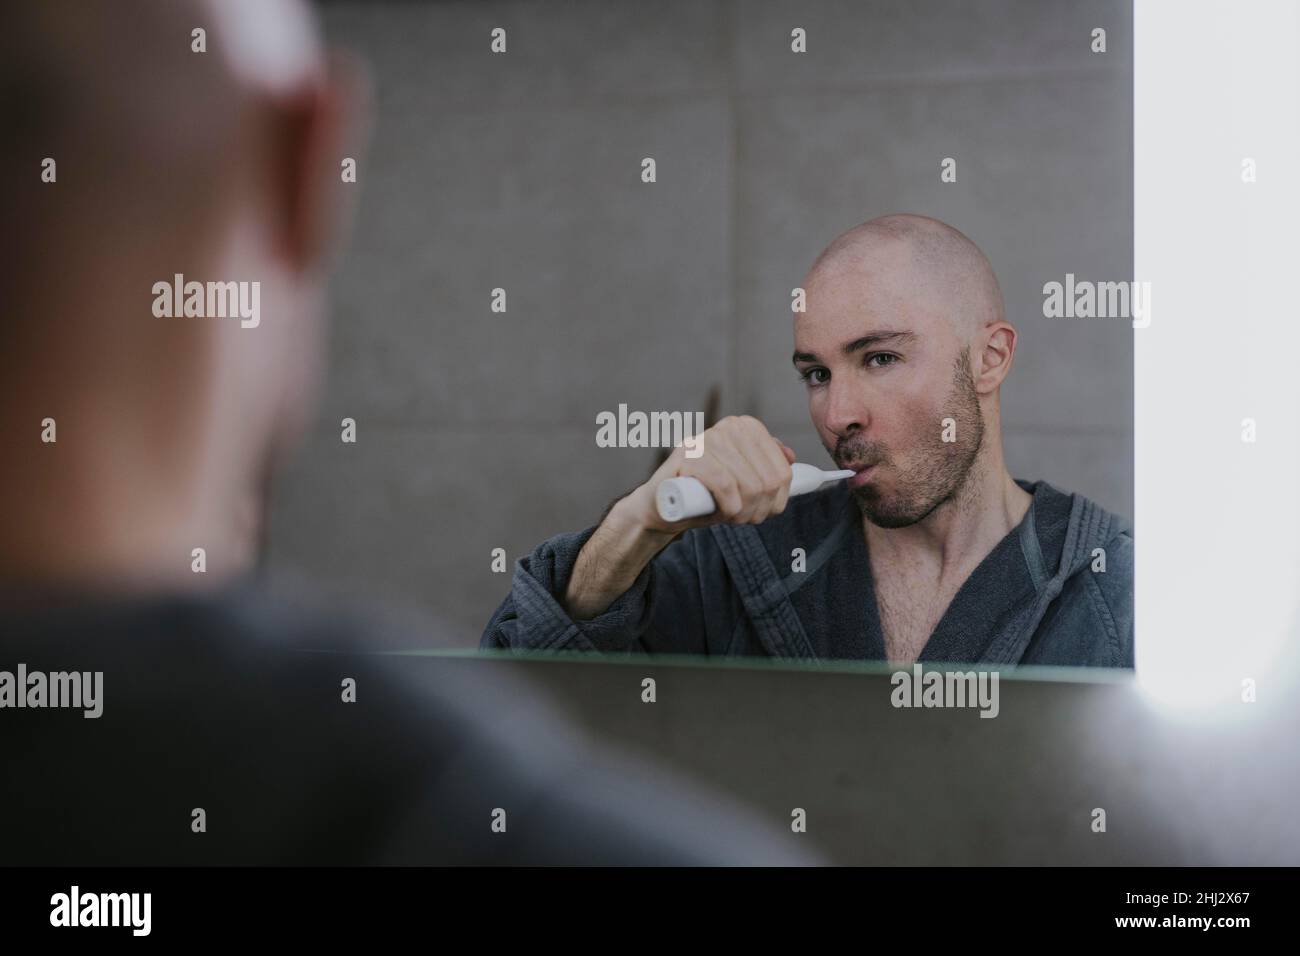 Man brushing his teeth in front of the bathroom mirror Stock Photo